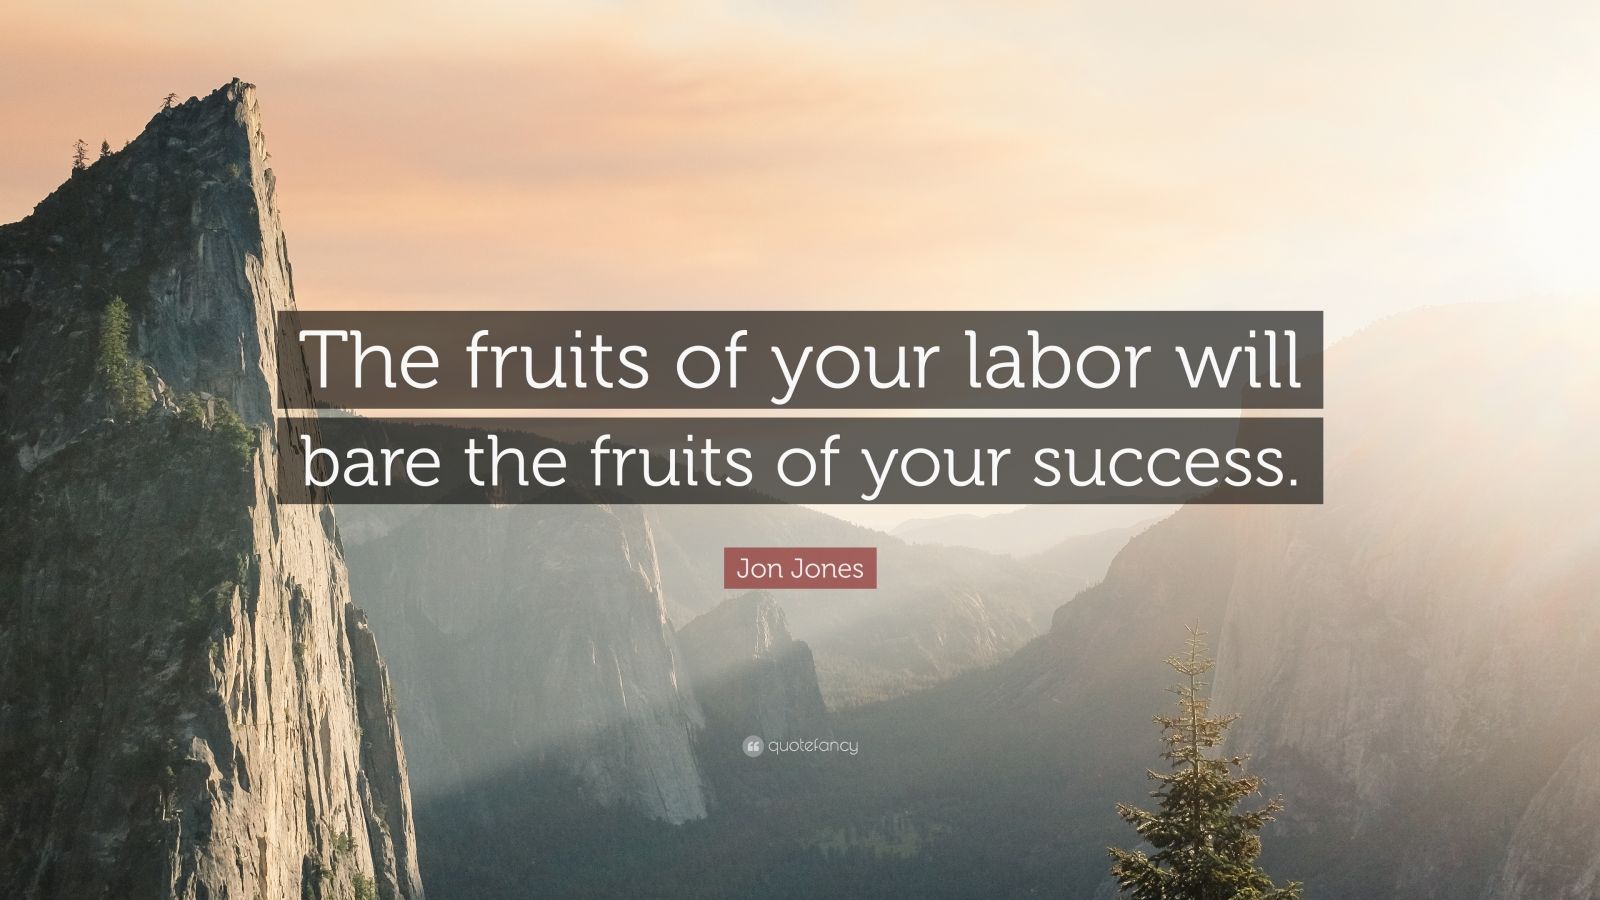 The fruits of your labor will bare the fruits of your success.